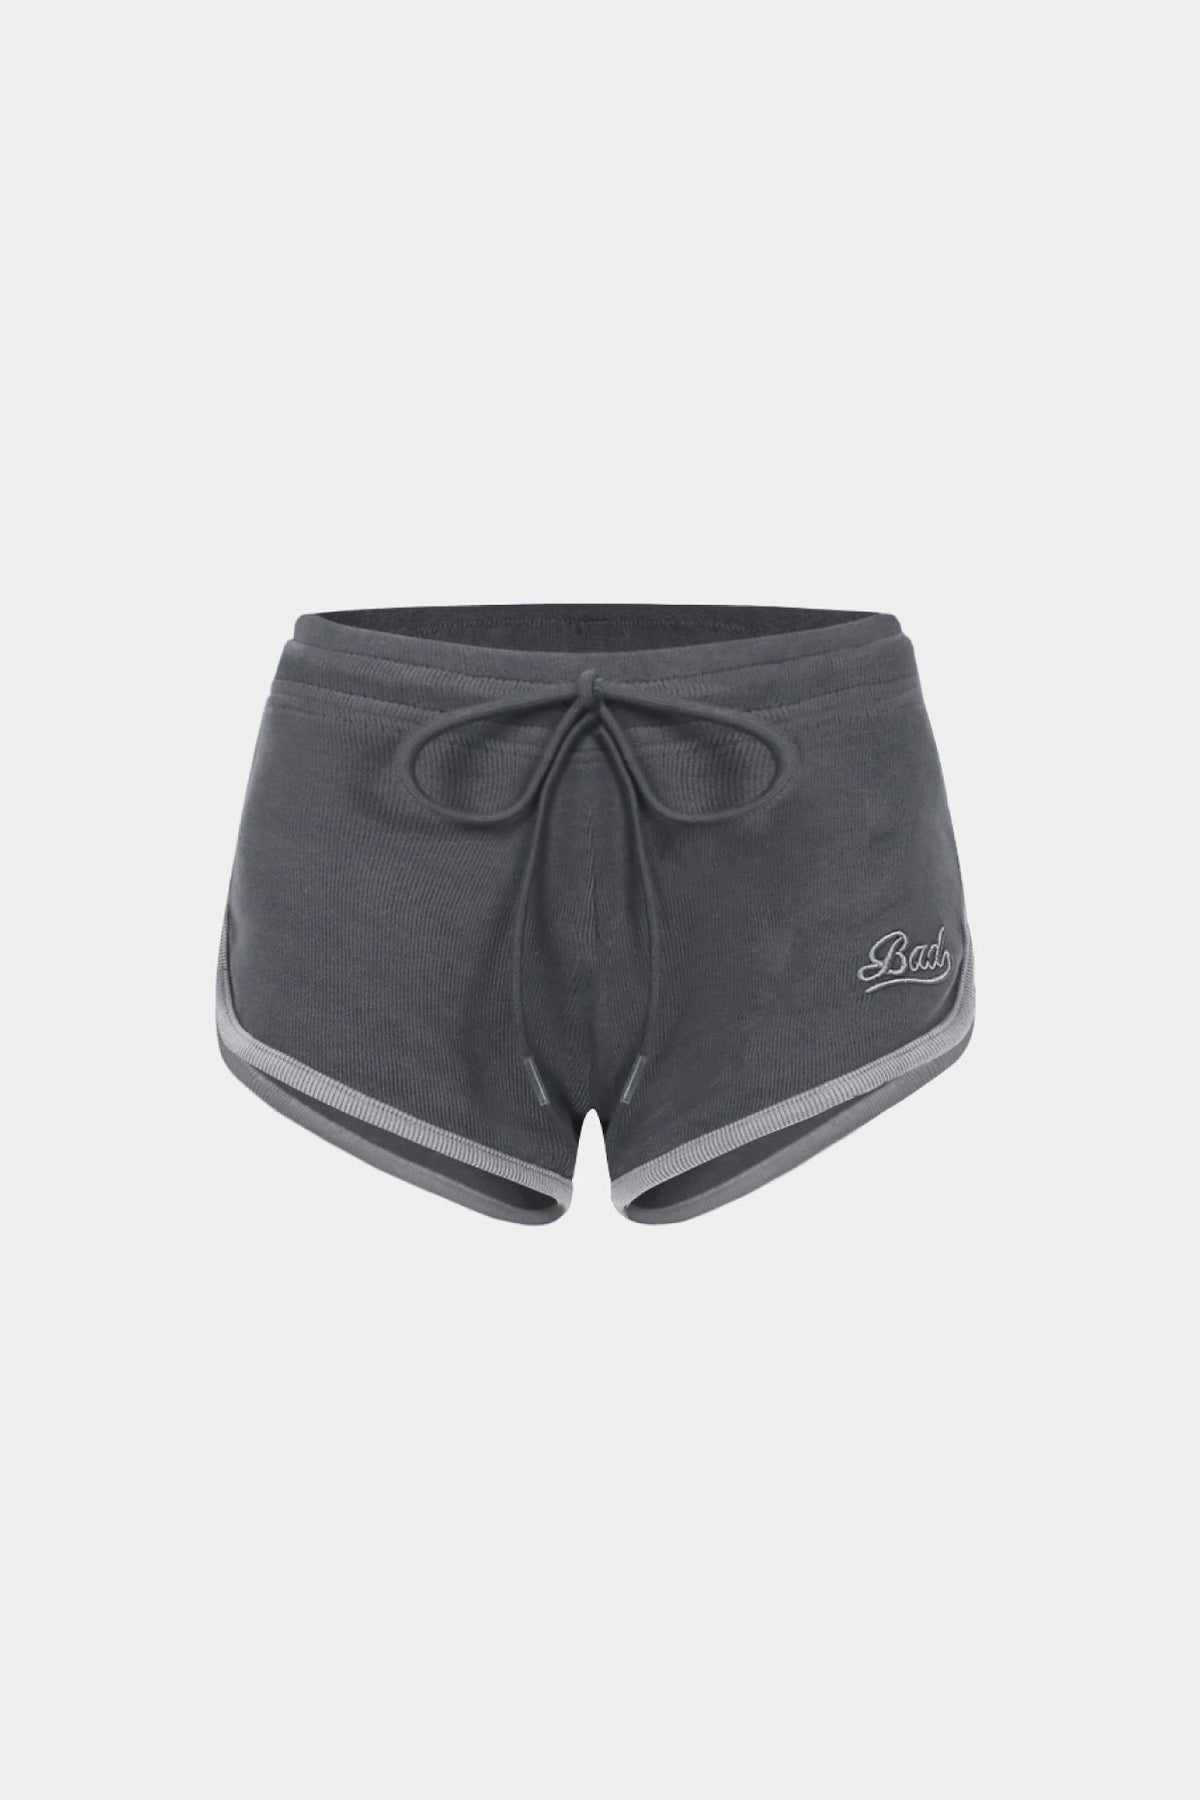 Badblood Beyond Soft Dolphin Shorts Charcoal